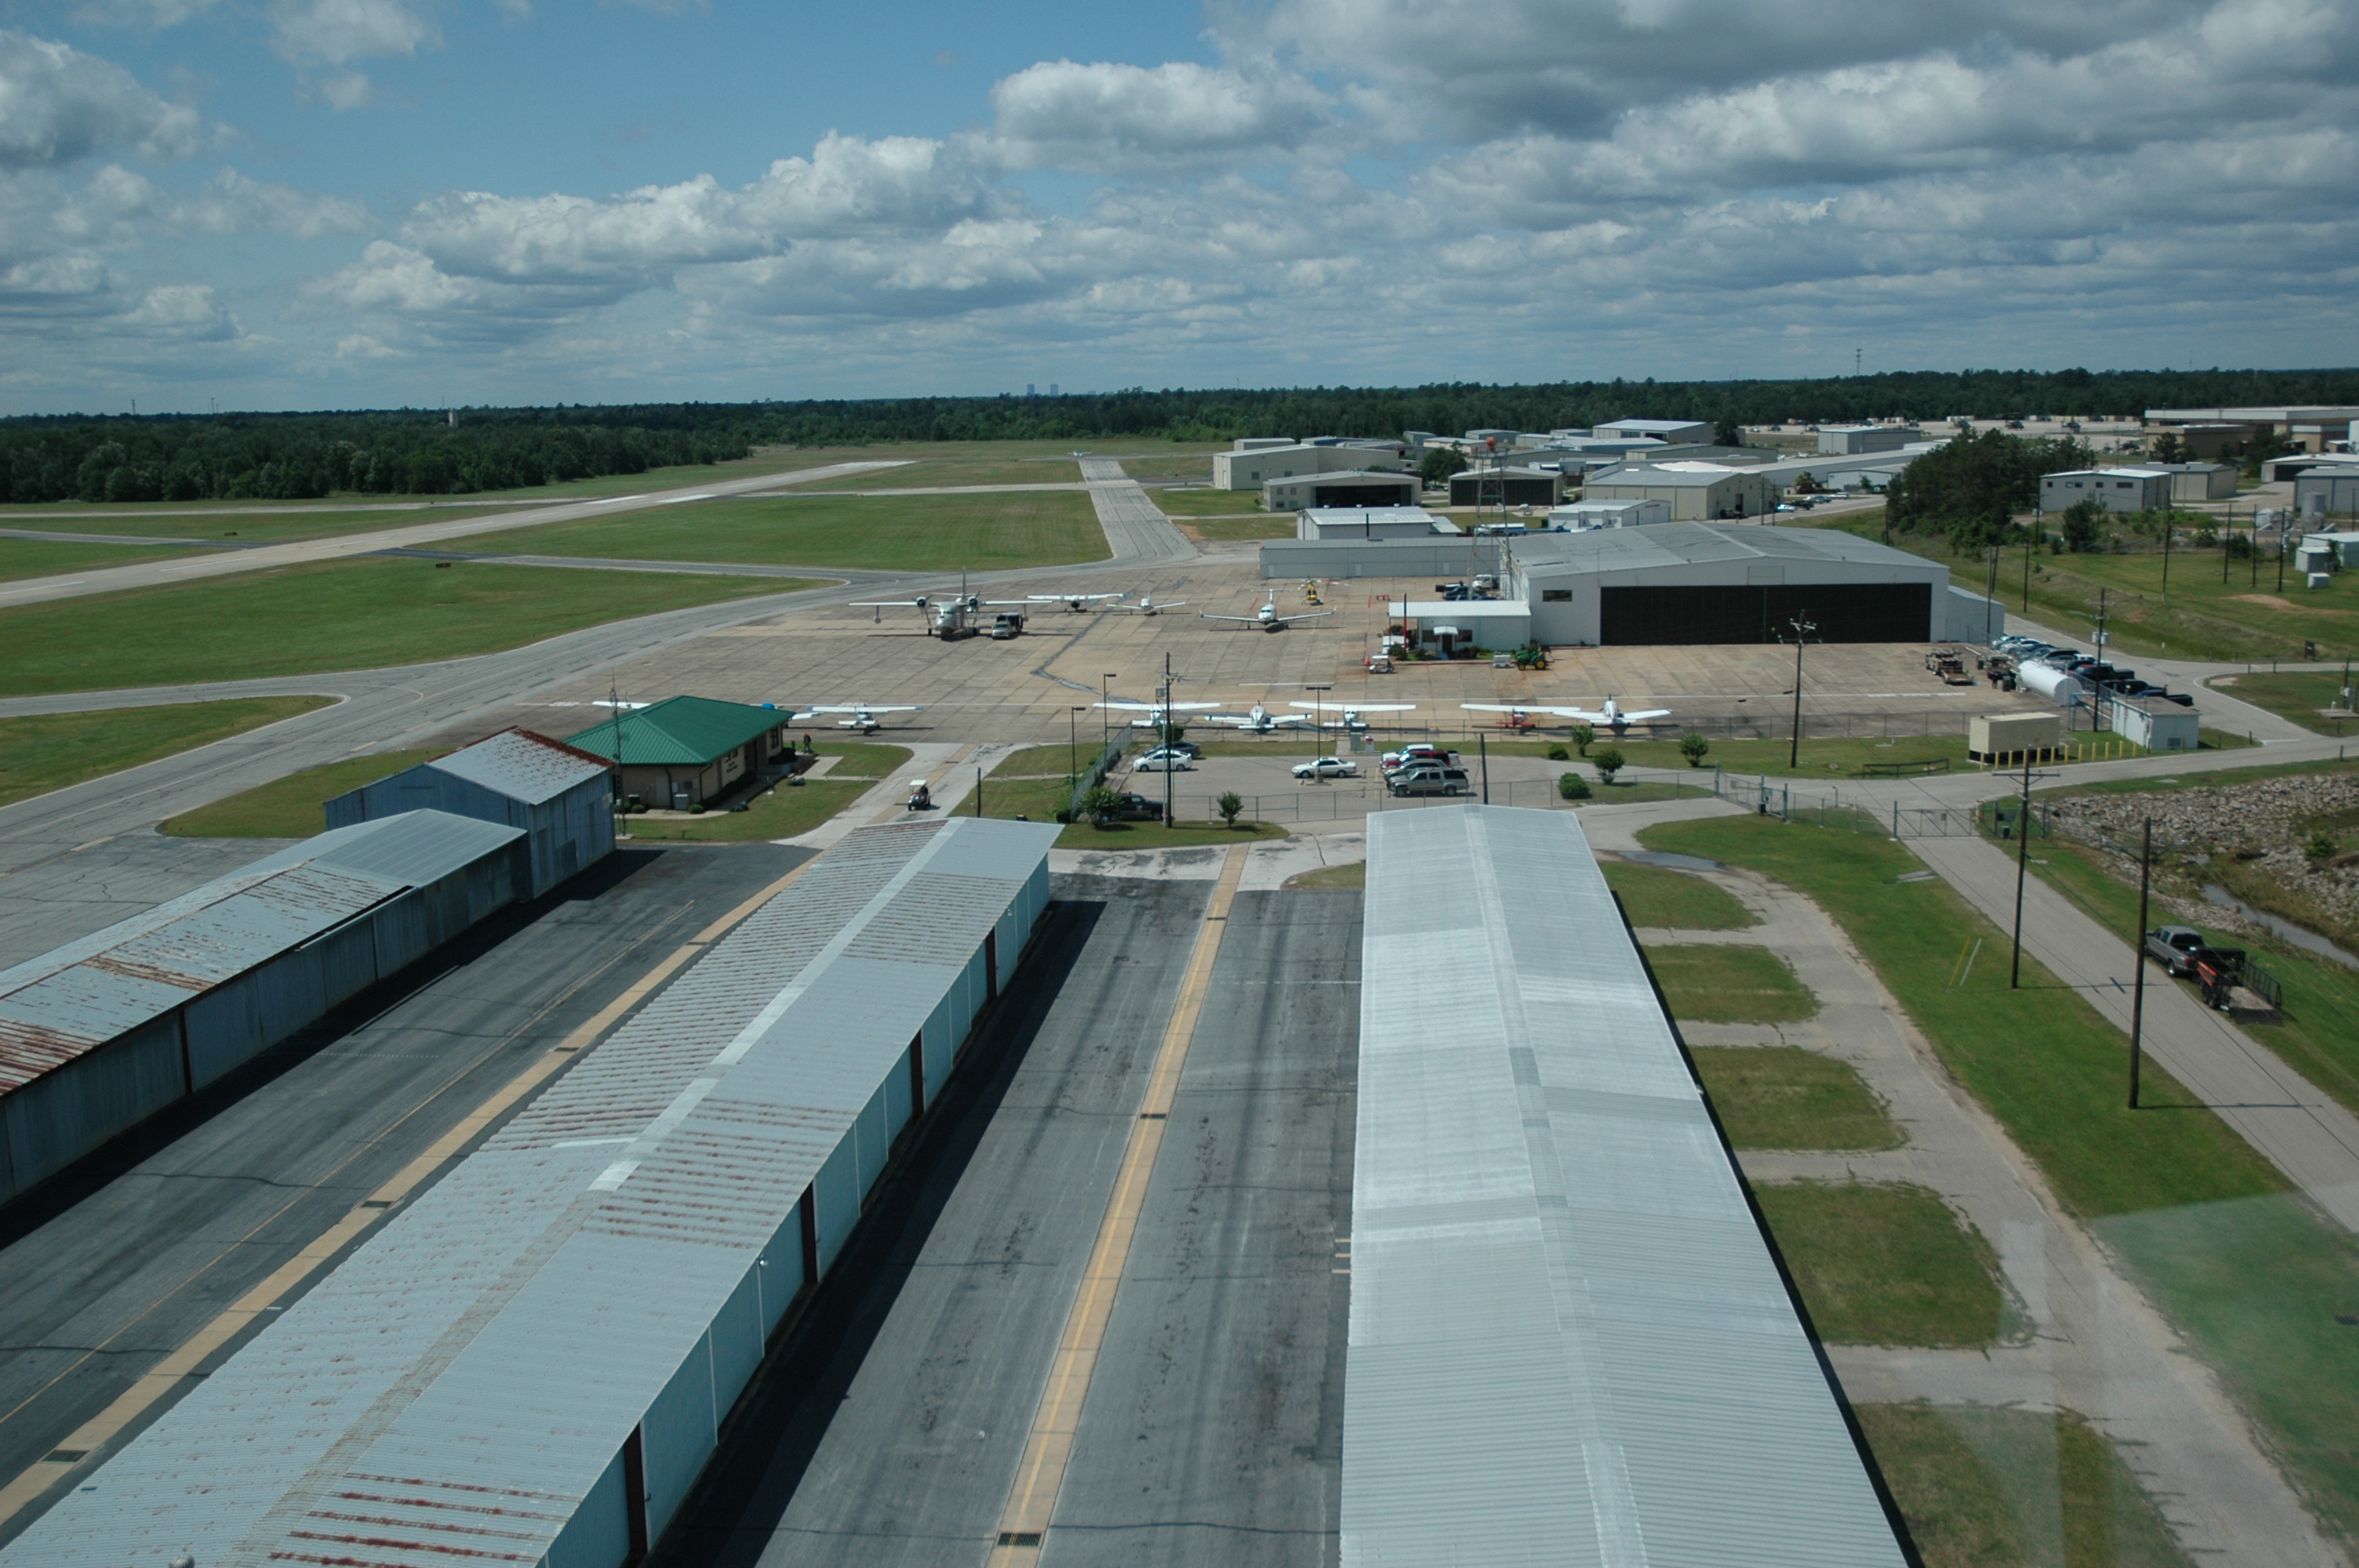 Location, State-of-the-Art FBO, History, and Continuous Improvements ...